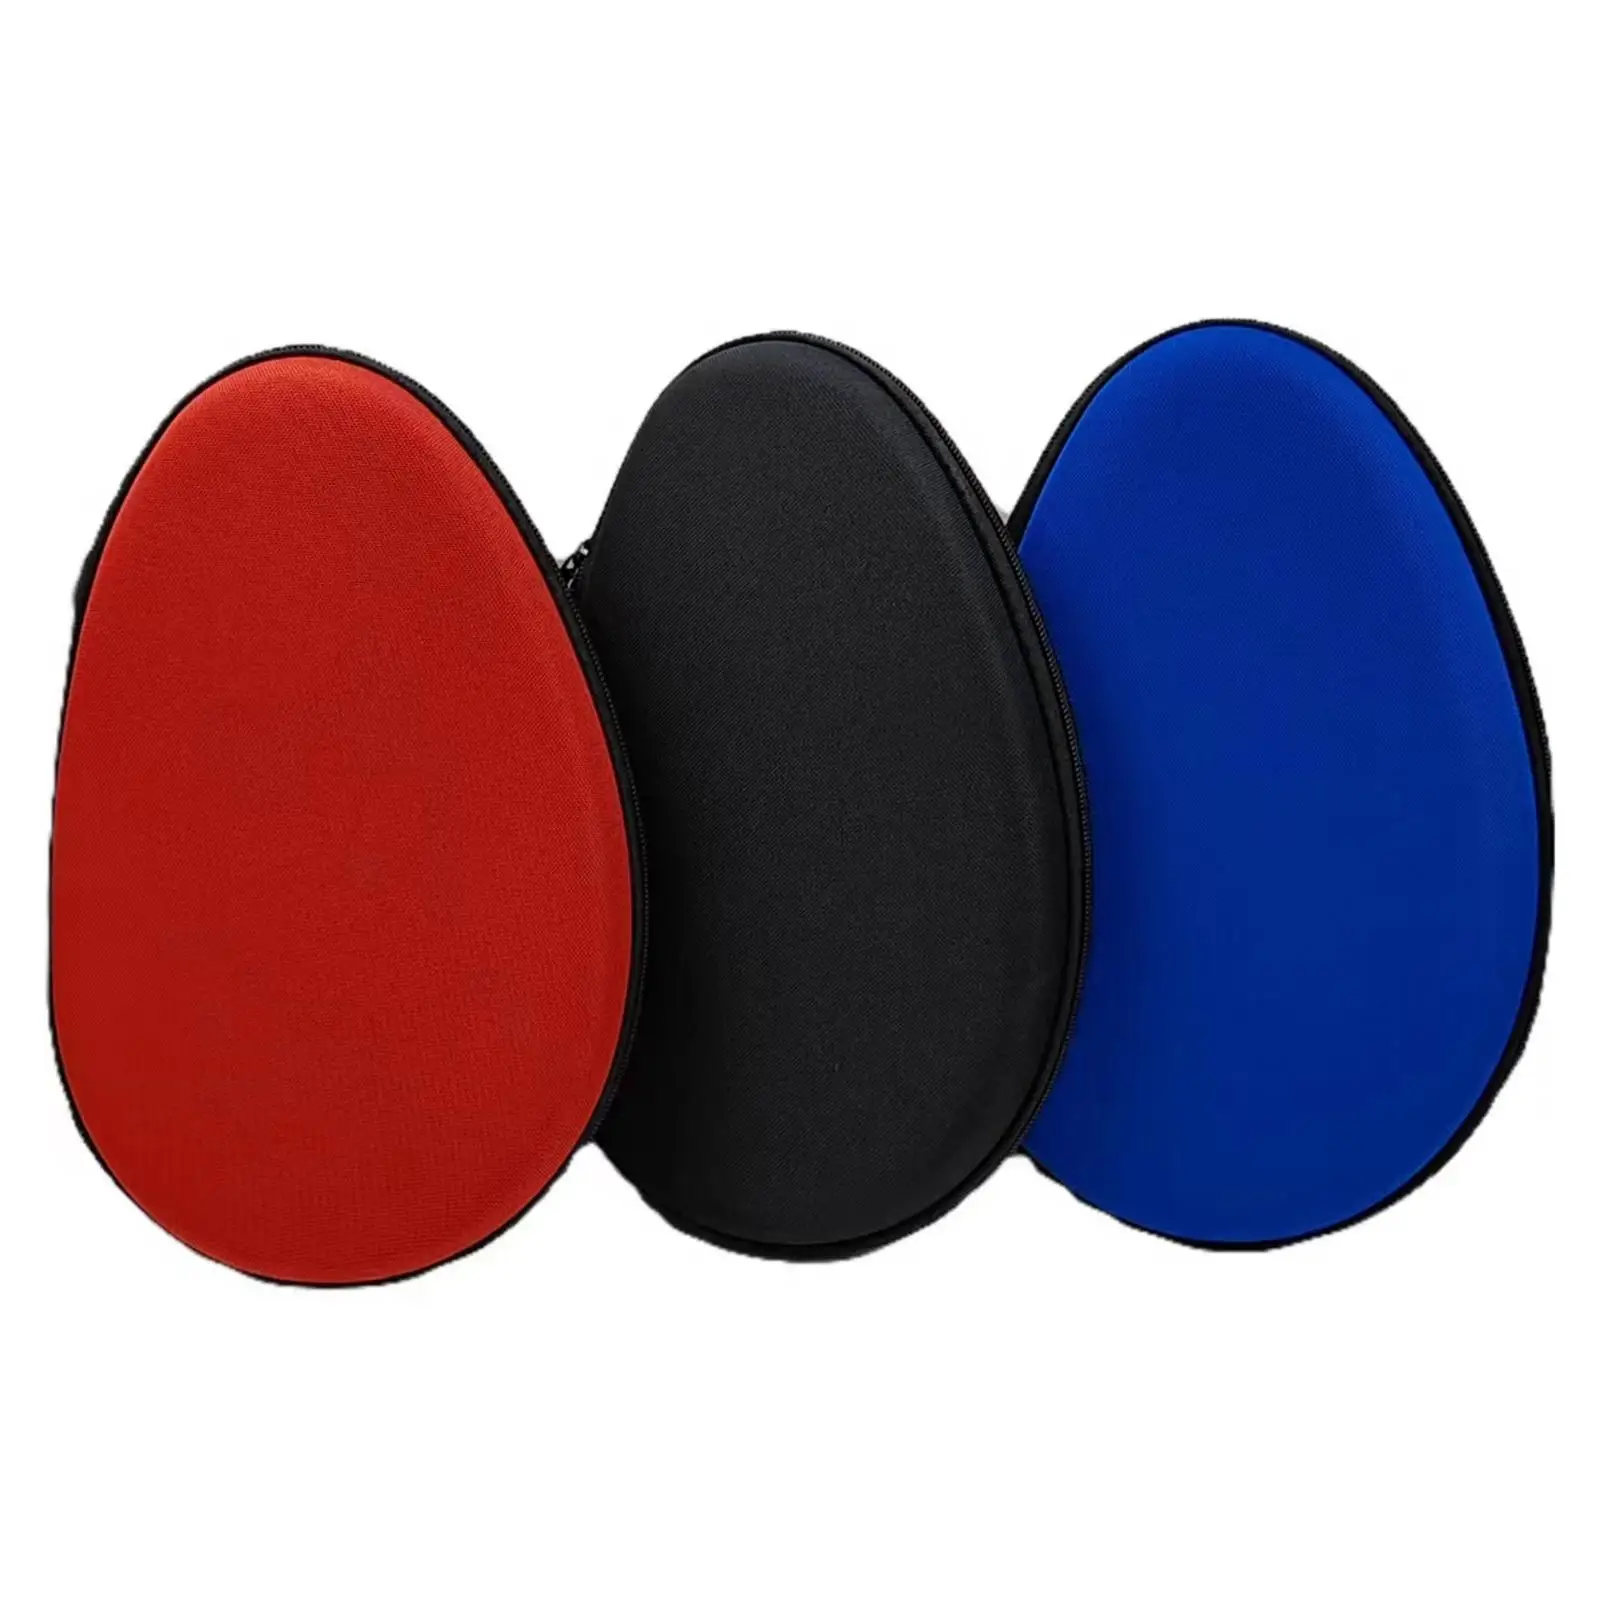 Portable Table Tennis Racket Case Sturdy Hard Gourd Durable Wear Resistant Ping Pong Paddle Bag for Competition Indoor Training